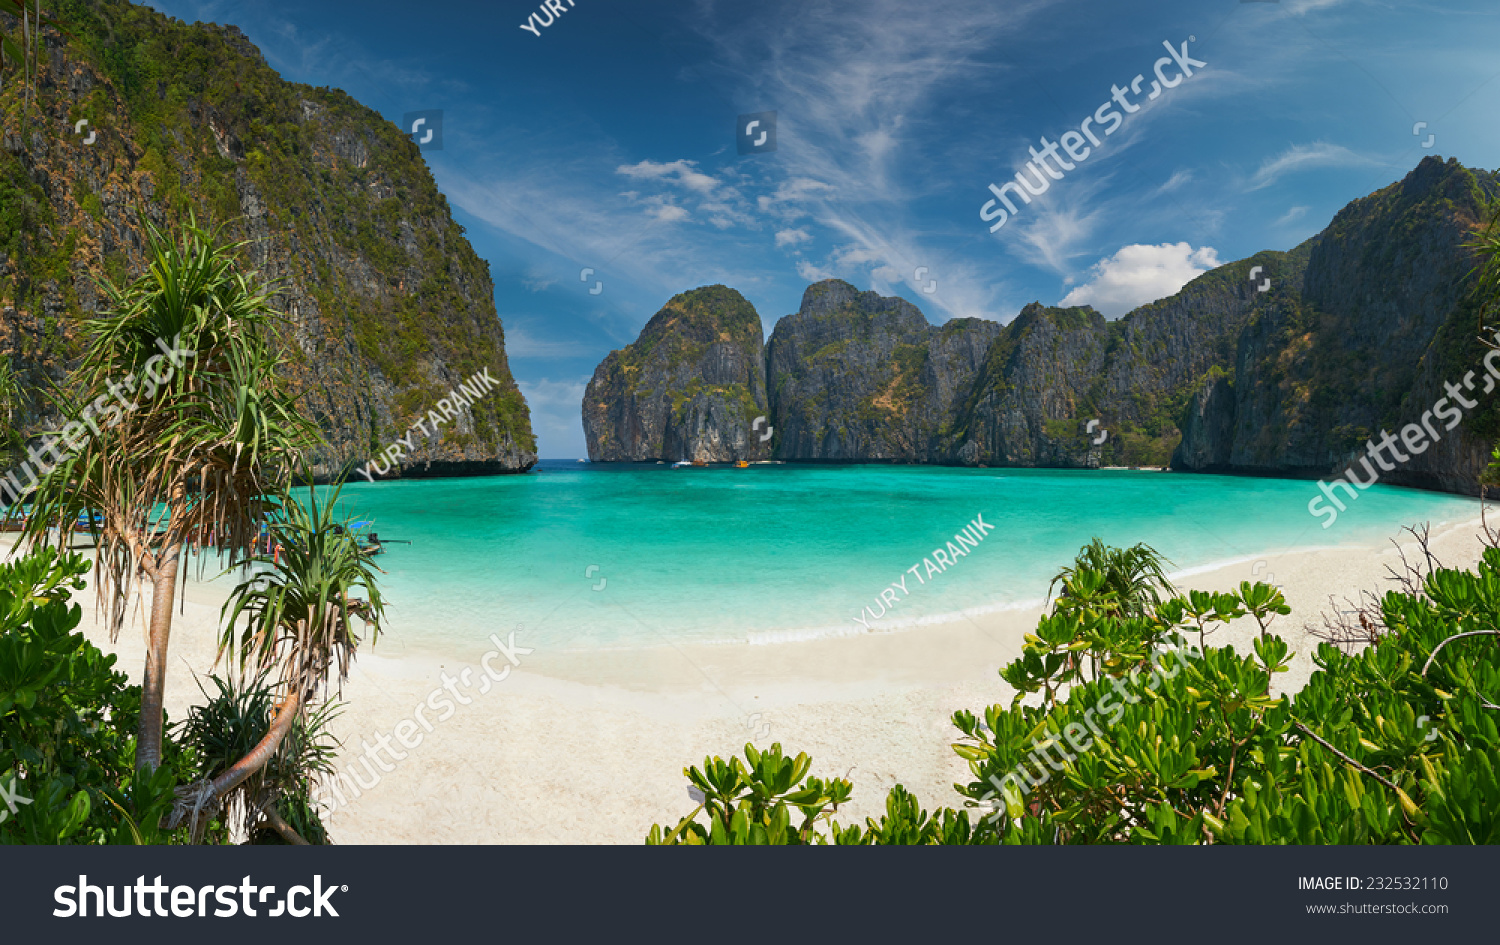 Travel vacation background - Tropical island with resorts - Phi-Phi island, Krabi Province, Thailand. #232532110